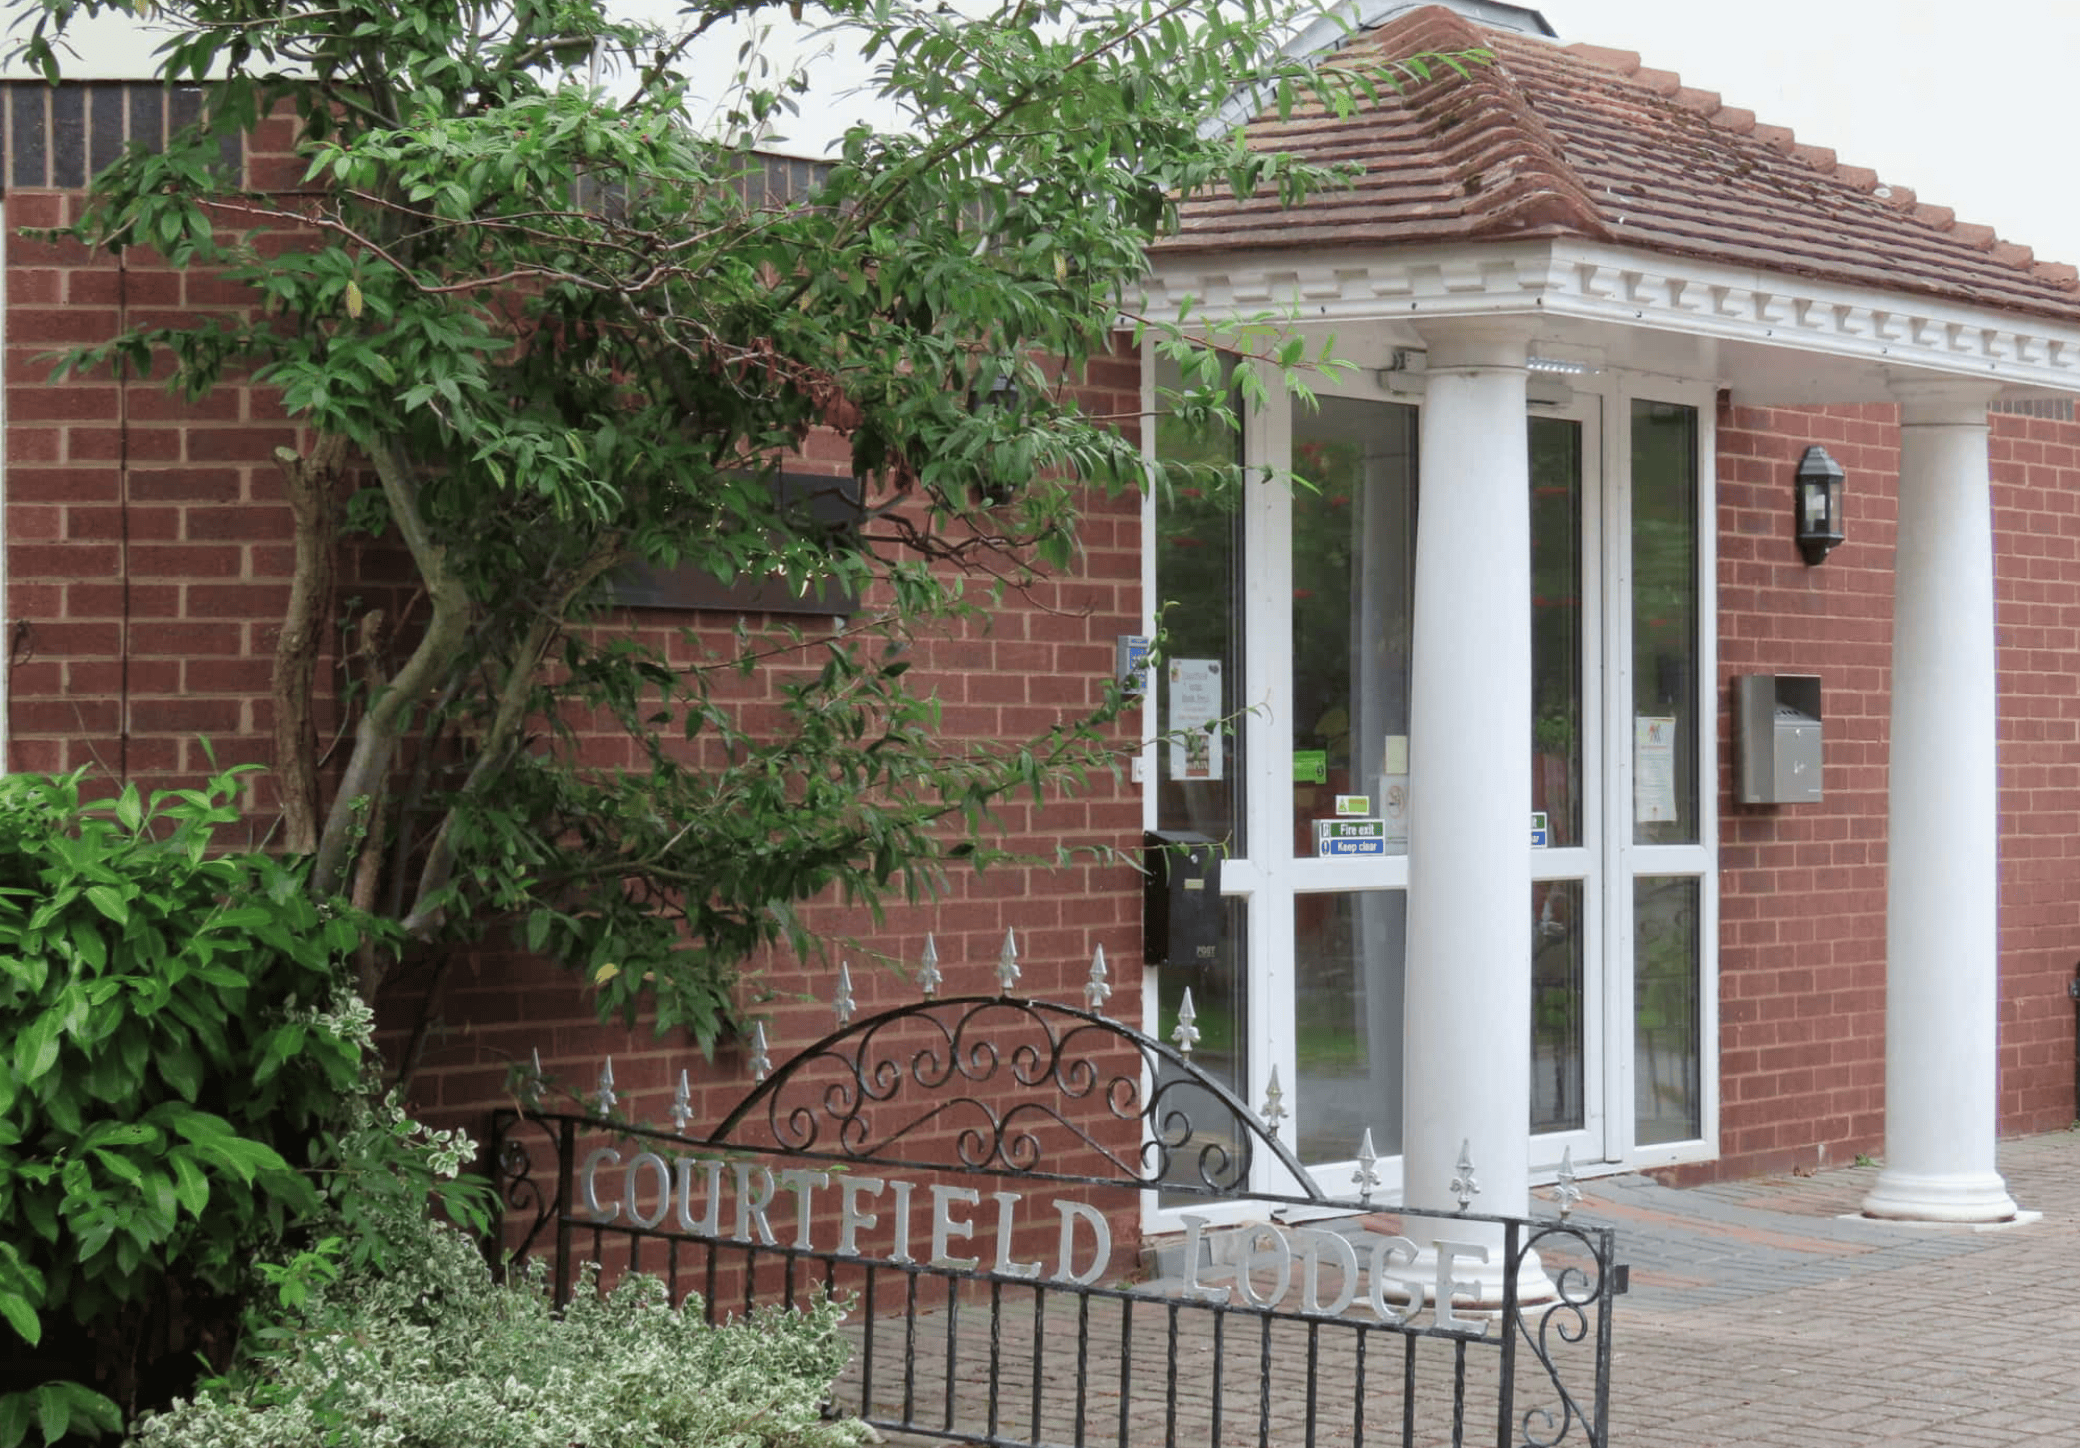 Entrance of Courtfield Lodge in Ormskirk, Lancashire